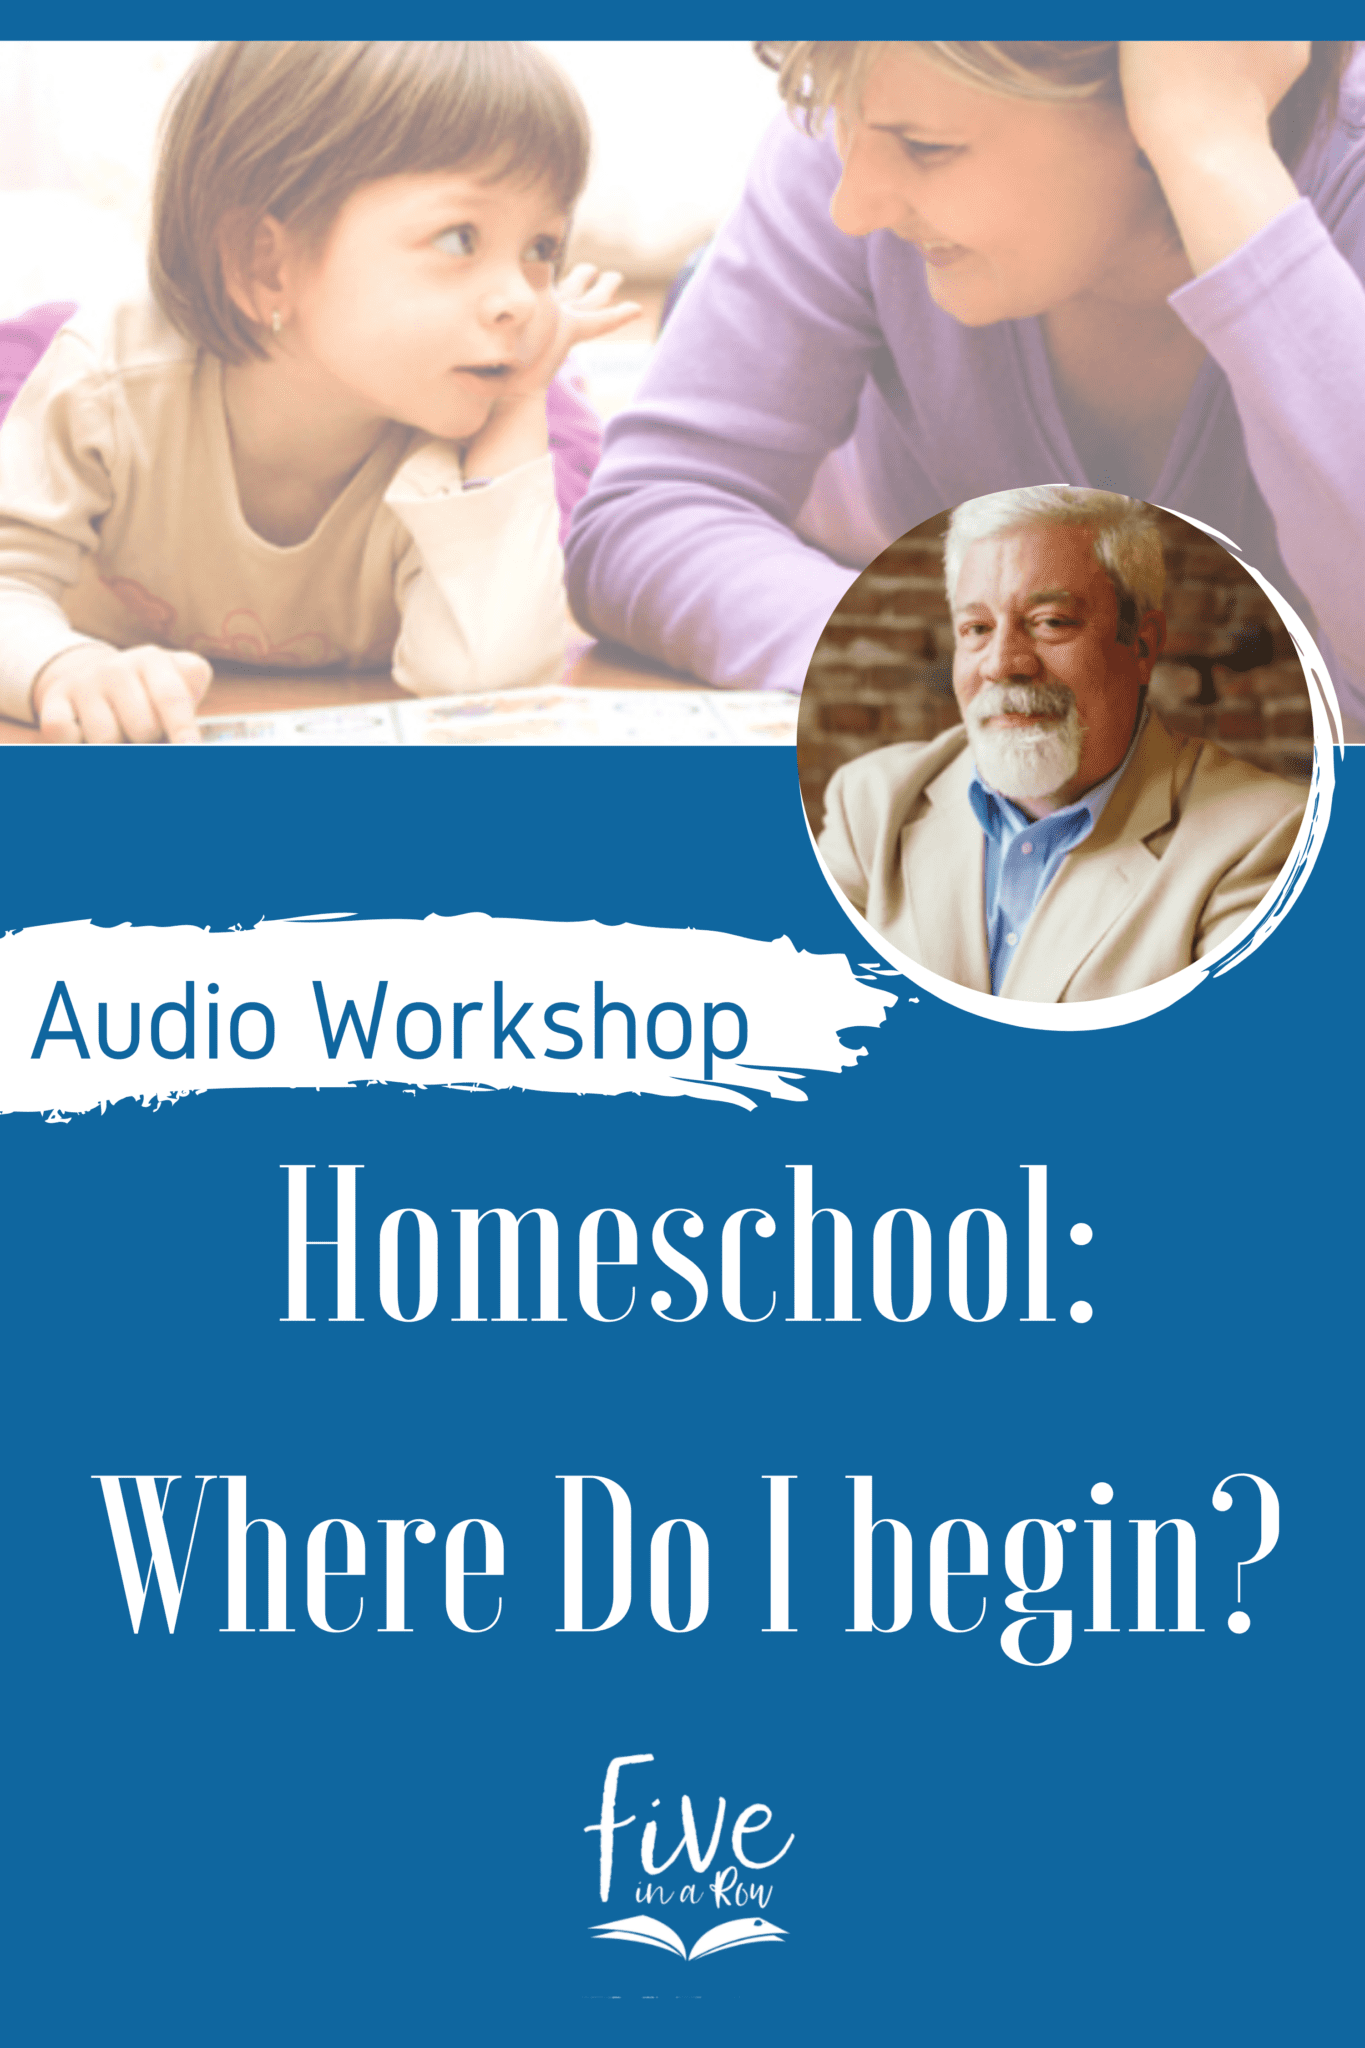 Homeschooling can seem overwhelming, but Steve will help you wrap your mind around the ‘big picture’ and make sense of this seemingly enormous undertaking.